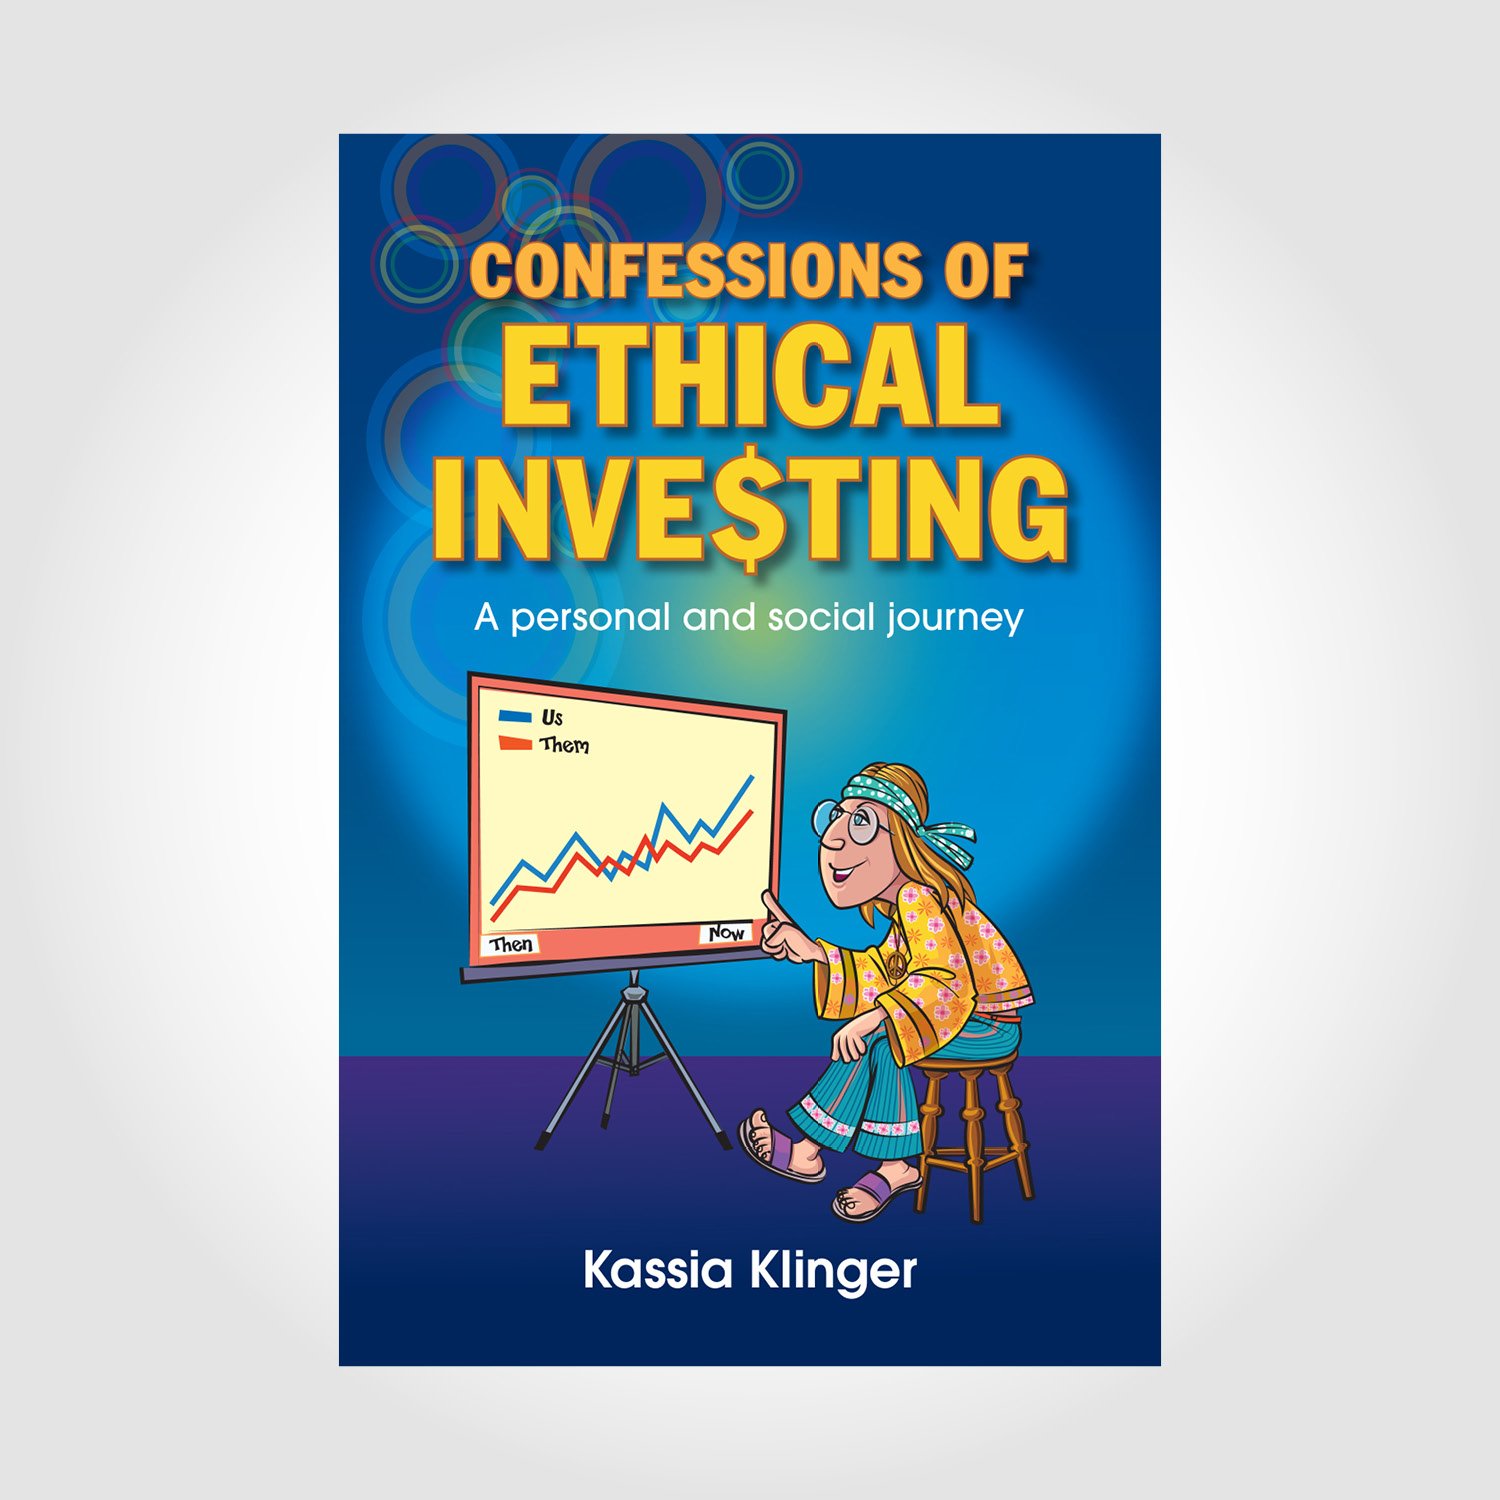 Confessions of Ethical Investing